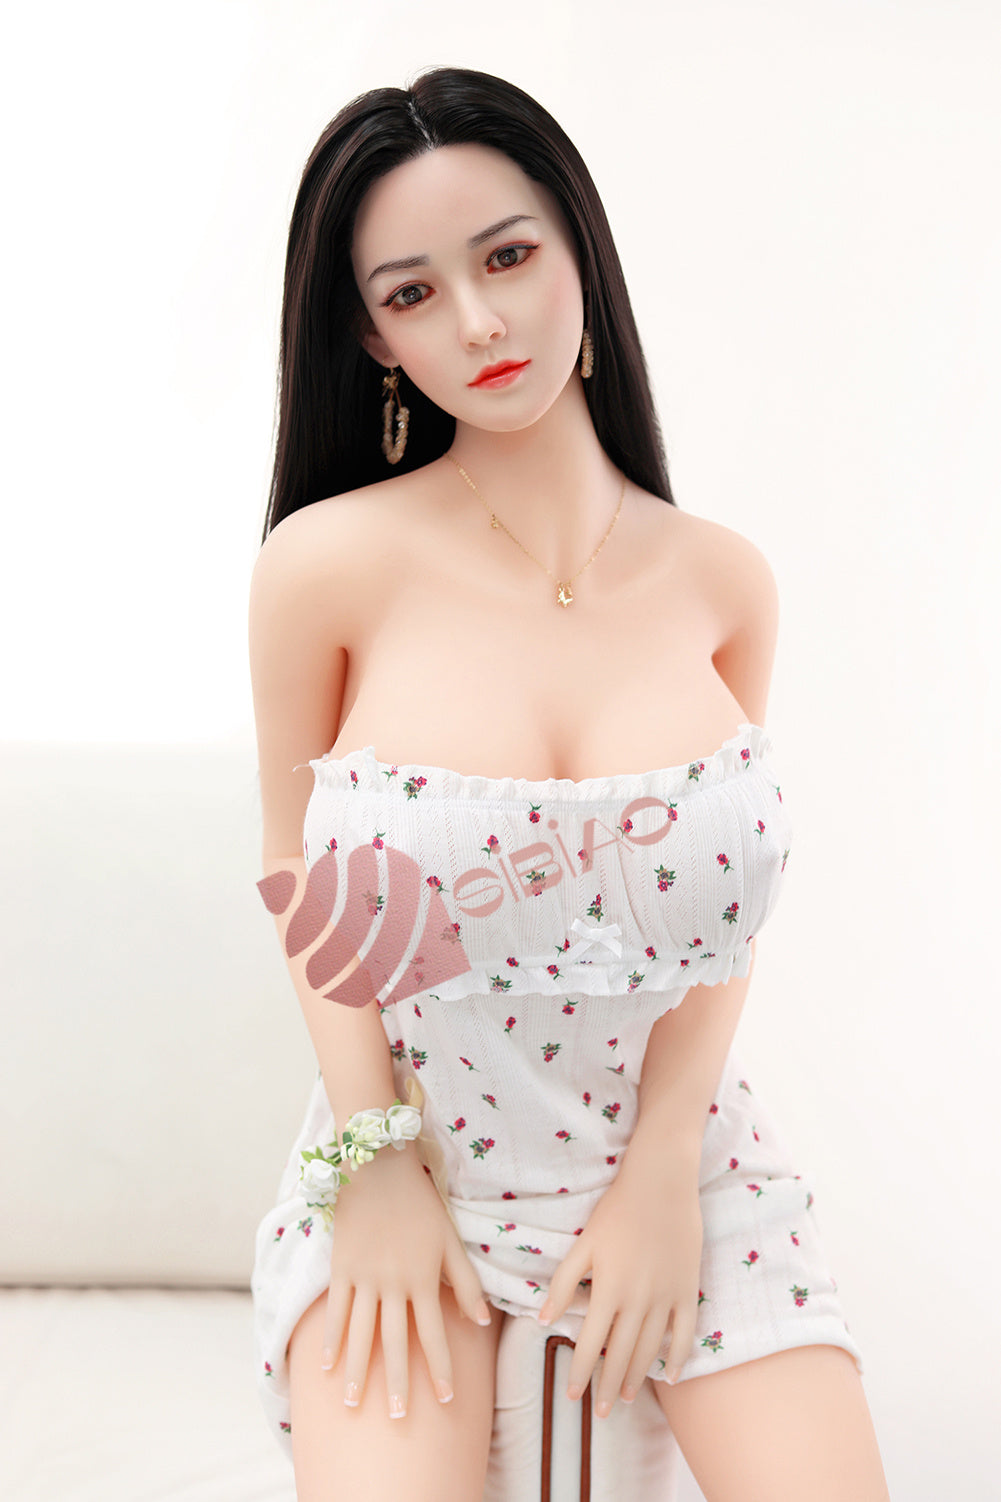 158cm/62in. SIA#158-221 Hope Busty And BigBreasted Real Doll （Free shipping in the continental US）